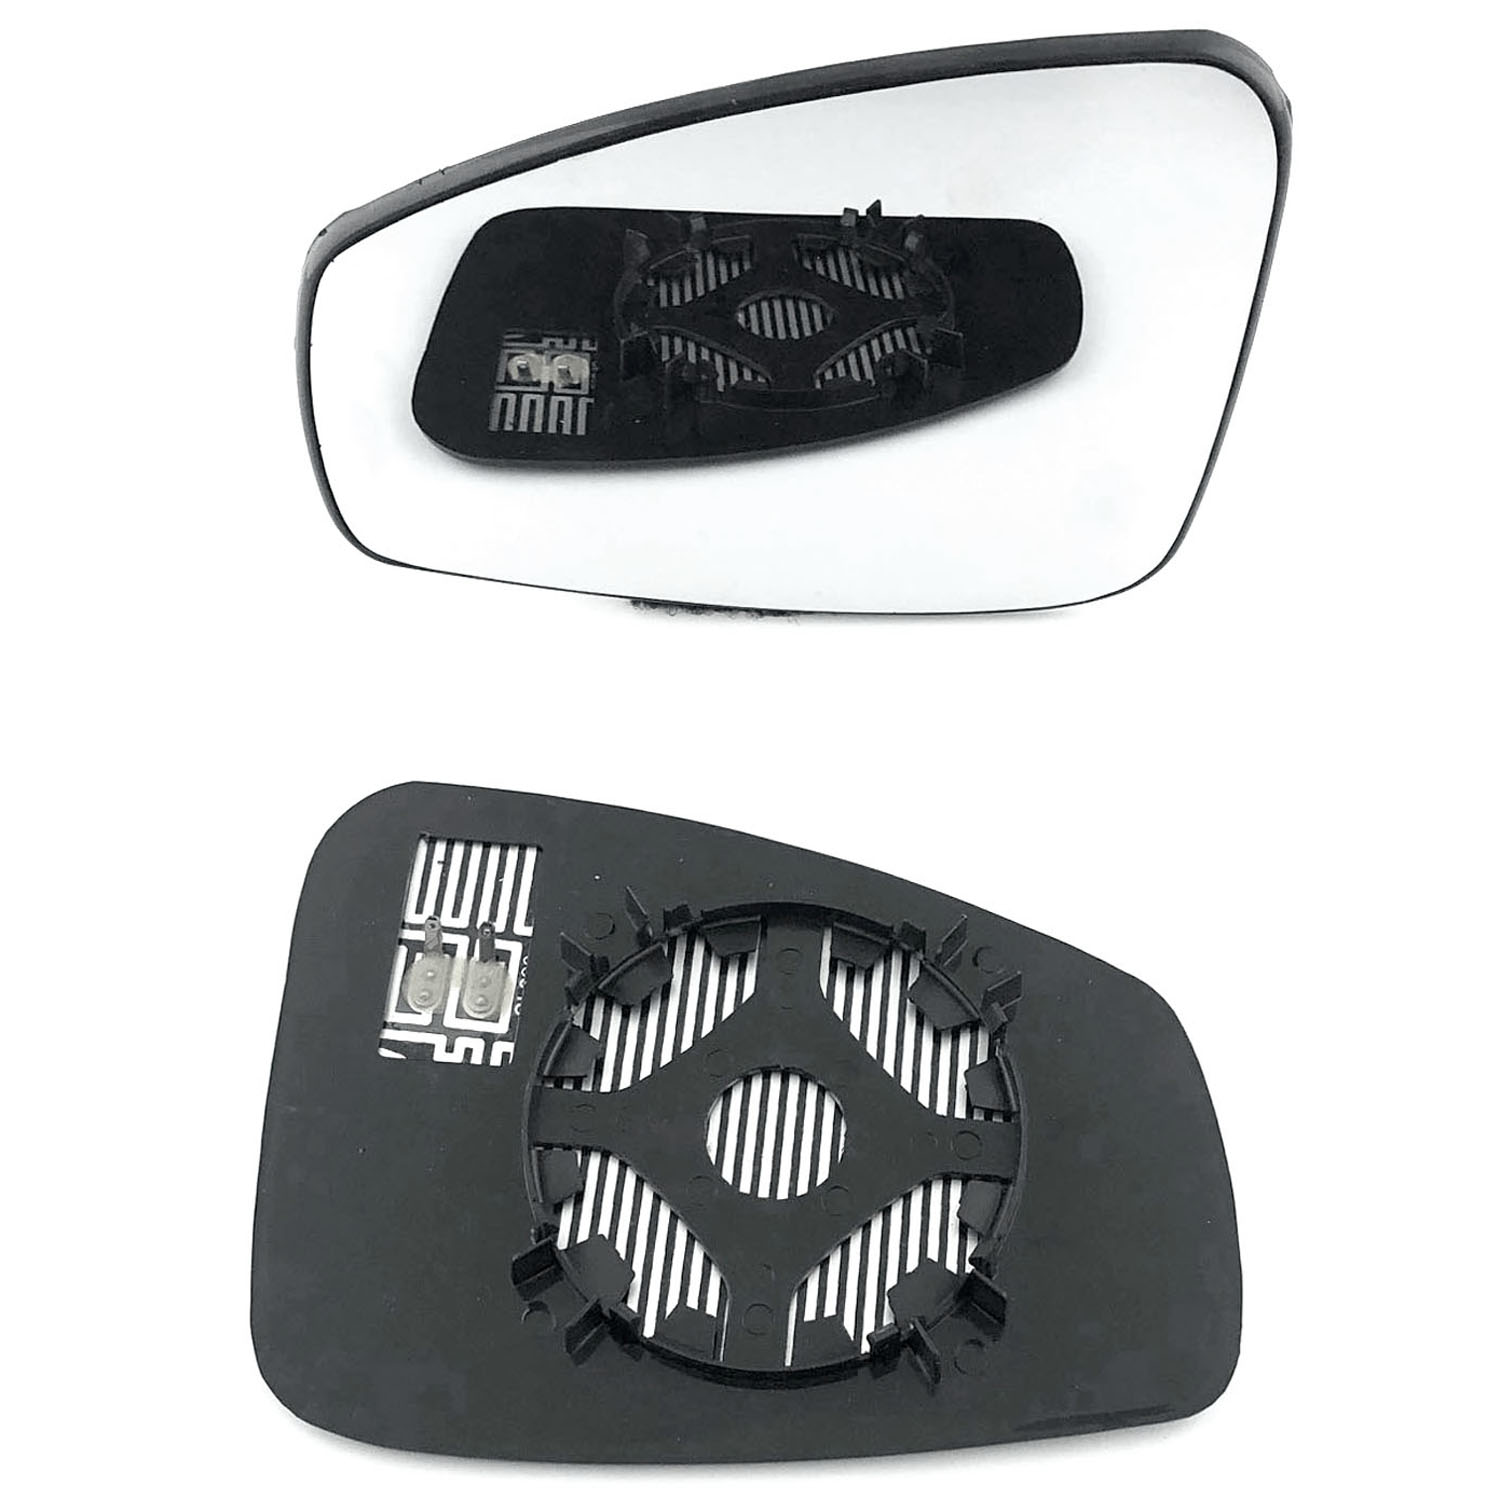 Renault Laguna Wing Mirror Glass With Base LEFT HAND ( UK Passenger Side ) 2008 to 2015 – Heated Base Convex Mirror